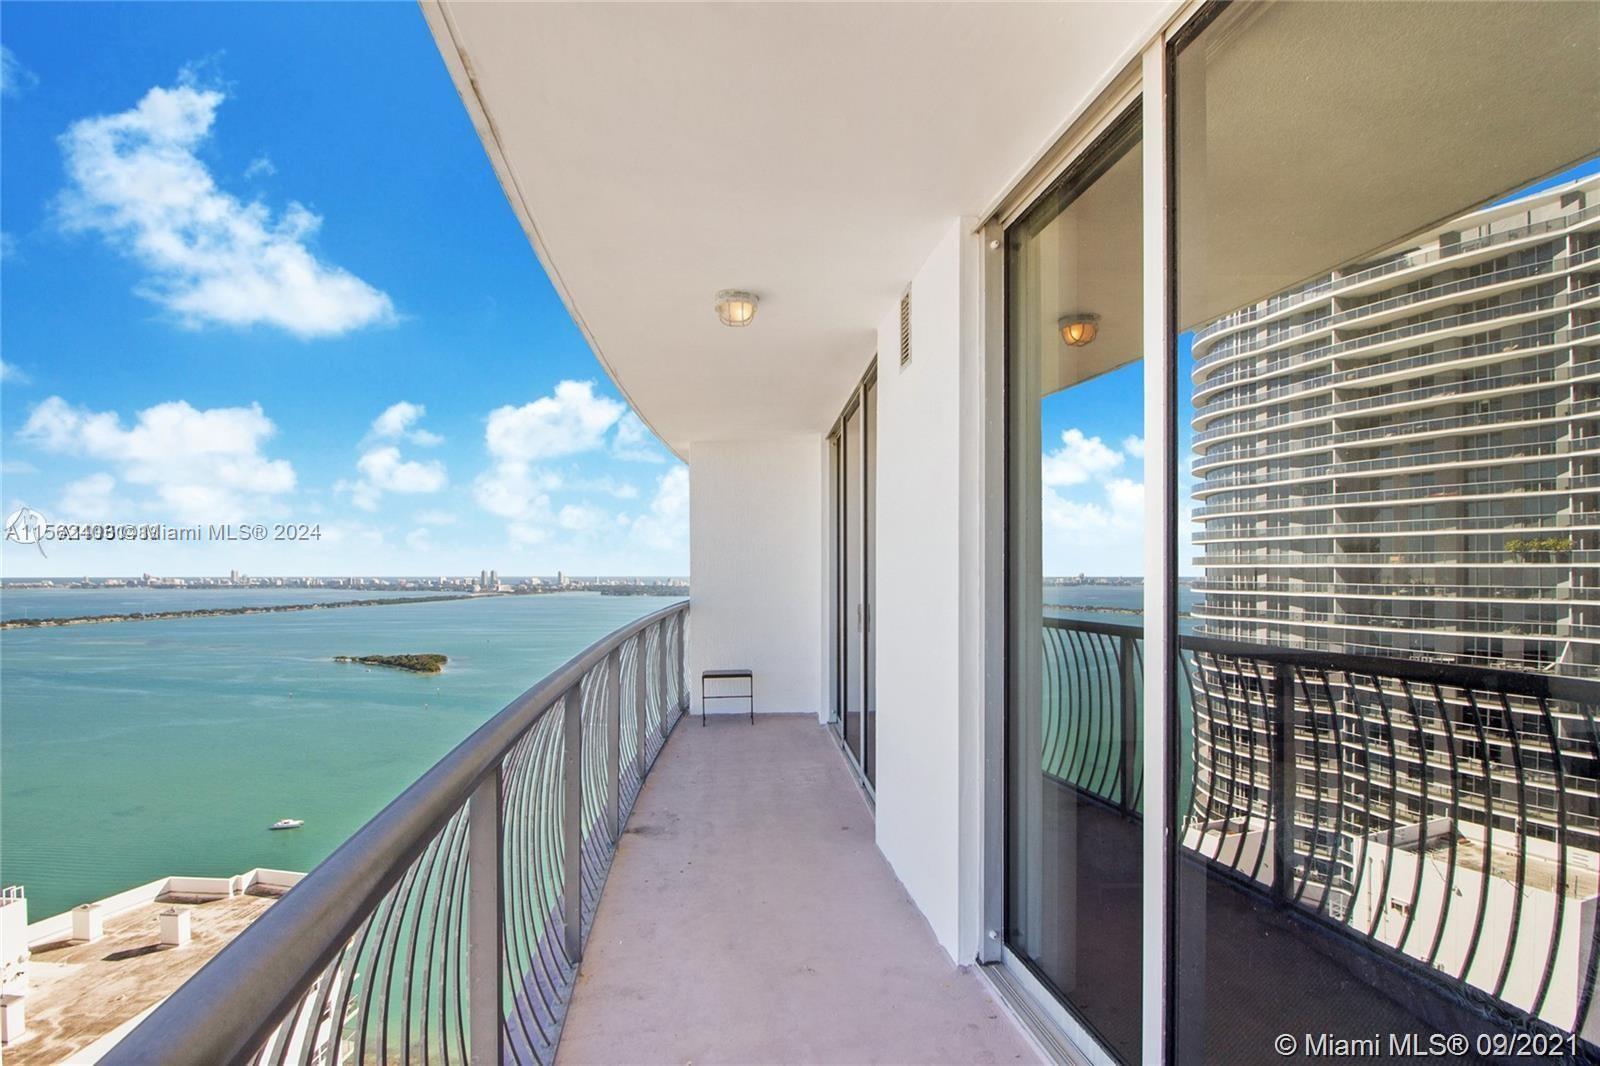 AMAZING APARTMENT IN OPERA TOWER WITH 1 BEDROOM AND 1 BATHROOM. THE OPERA TOWER IS LOCATED IN DOWNTOWN MIAMI WITH THE AMAZING AMENITIES OFFERED TO RESIDENTS. 
EASY SHOW. VACANT. AVAILABLE NOW